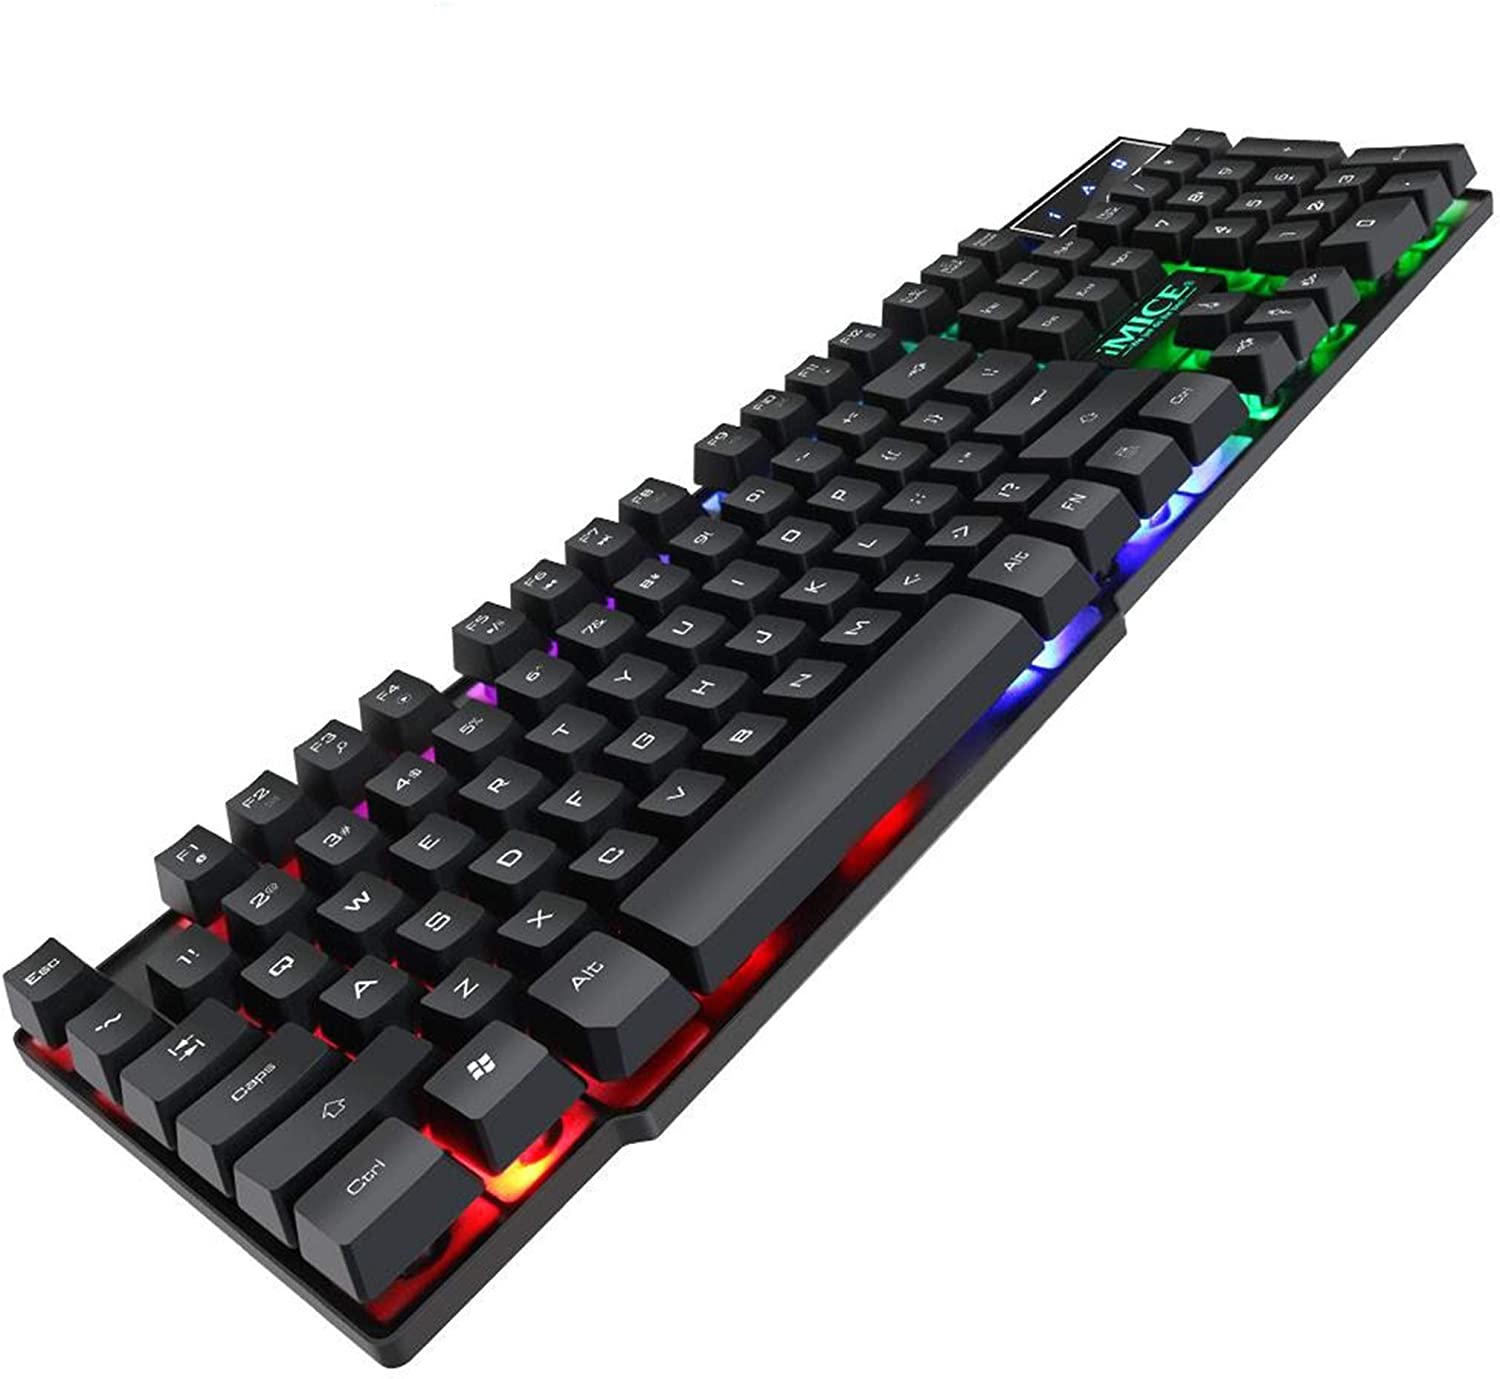 HF-IMAK600: Backlight Suspension Key Mechanical Keyboard Game Wired PC Notebook USB Wired Gaming Keyboard - Click Image to Close